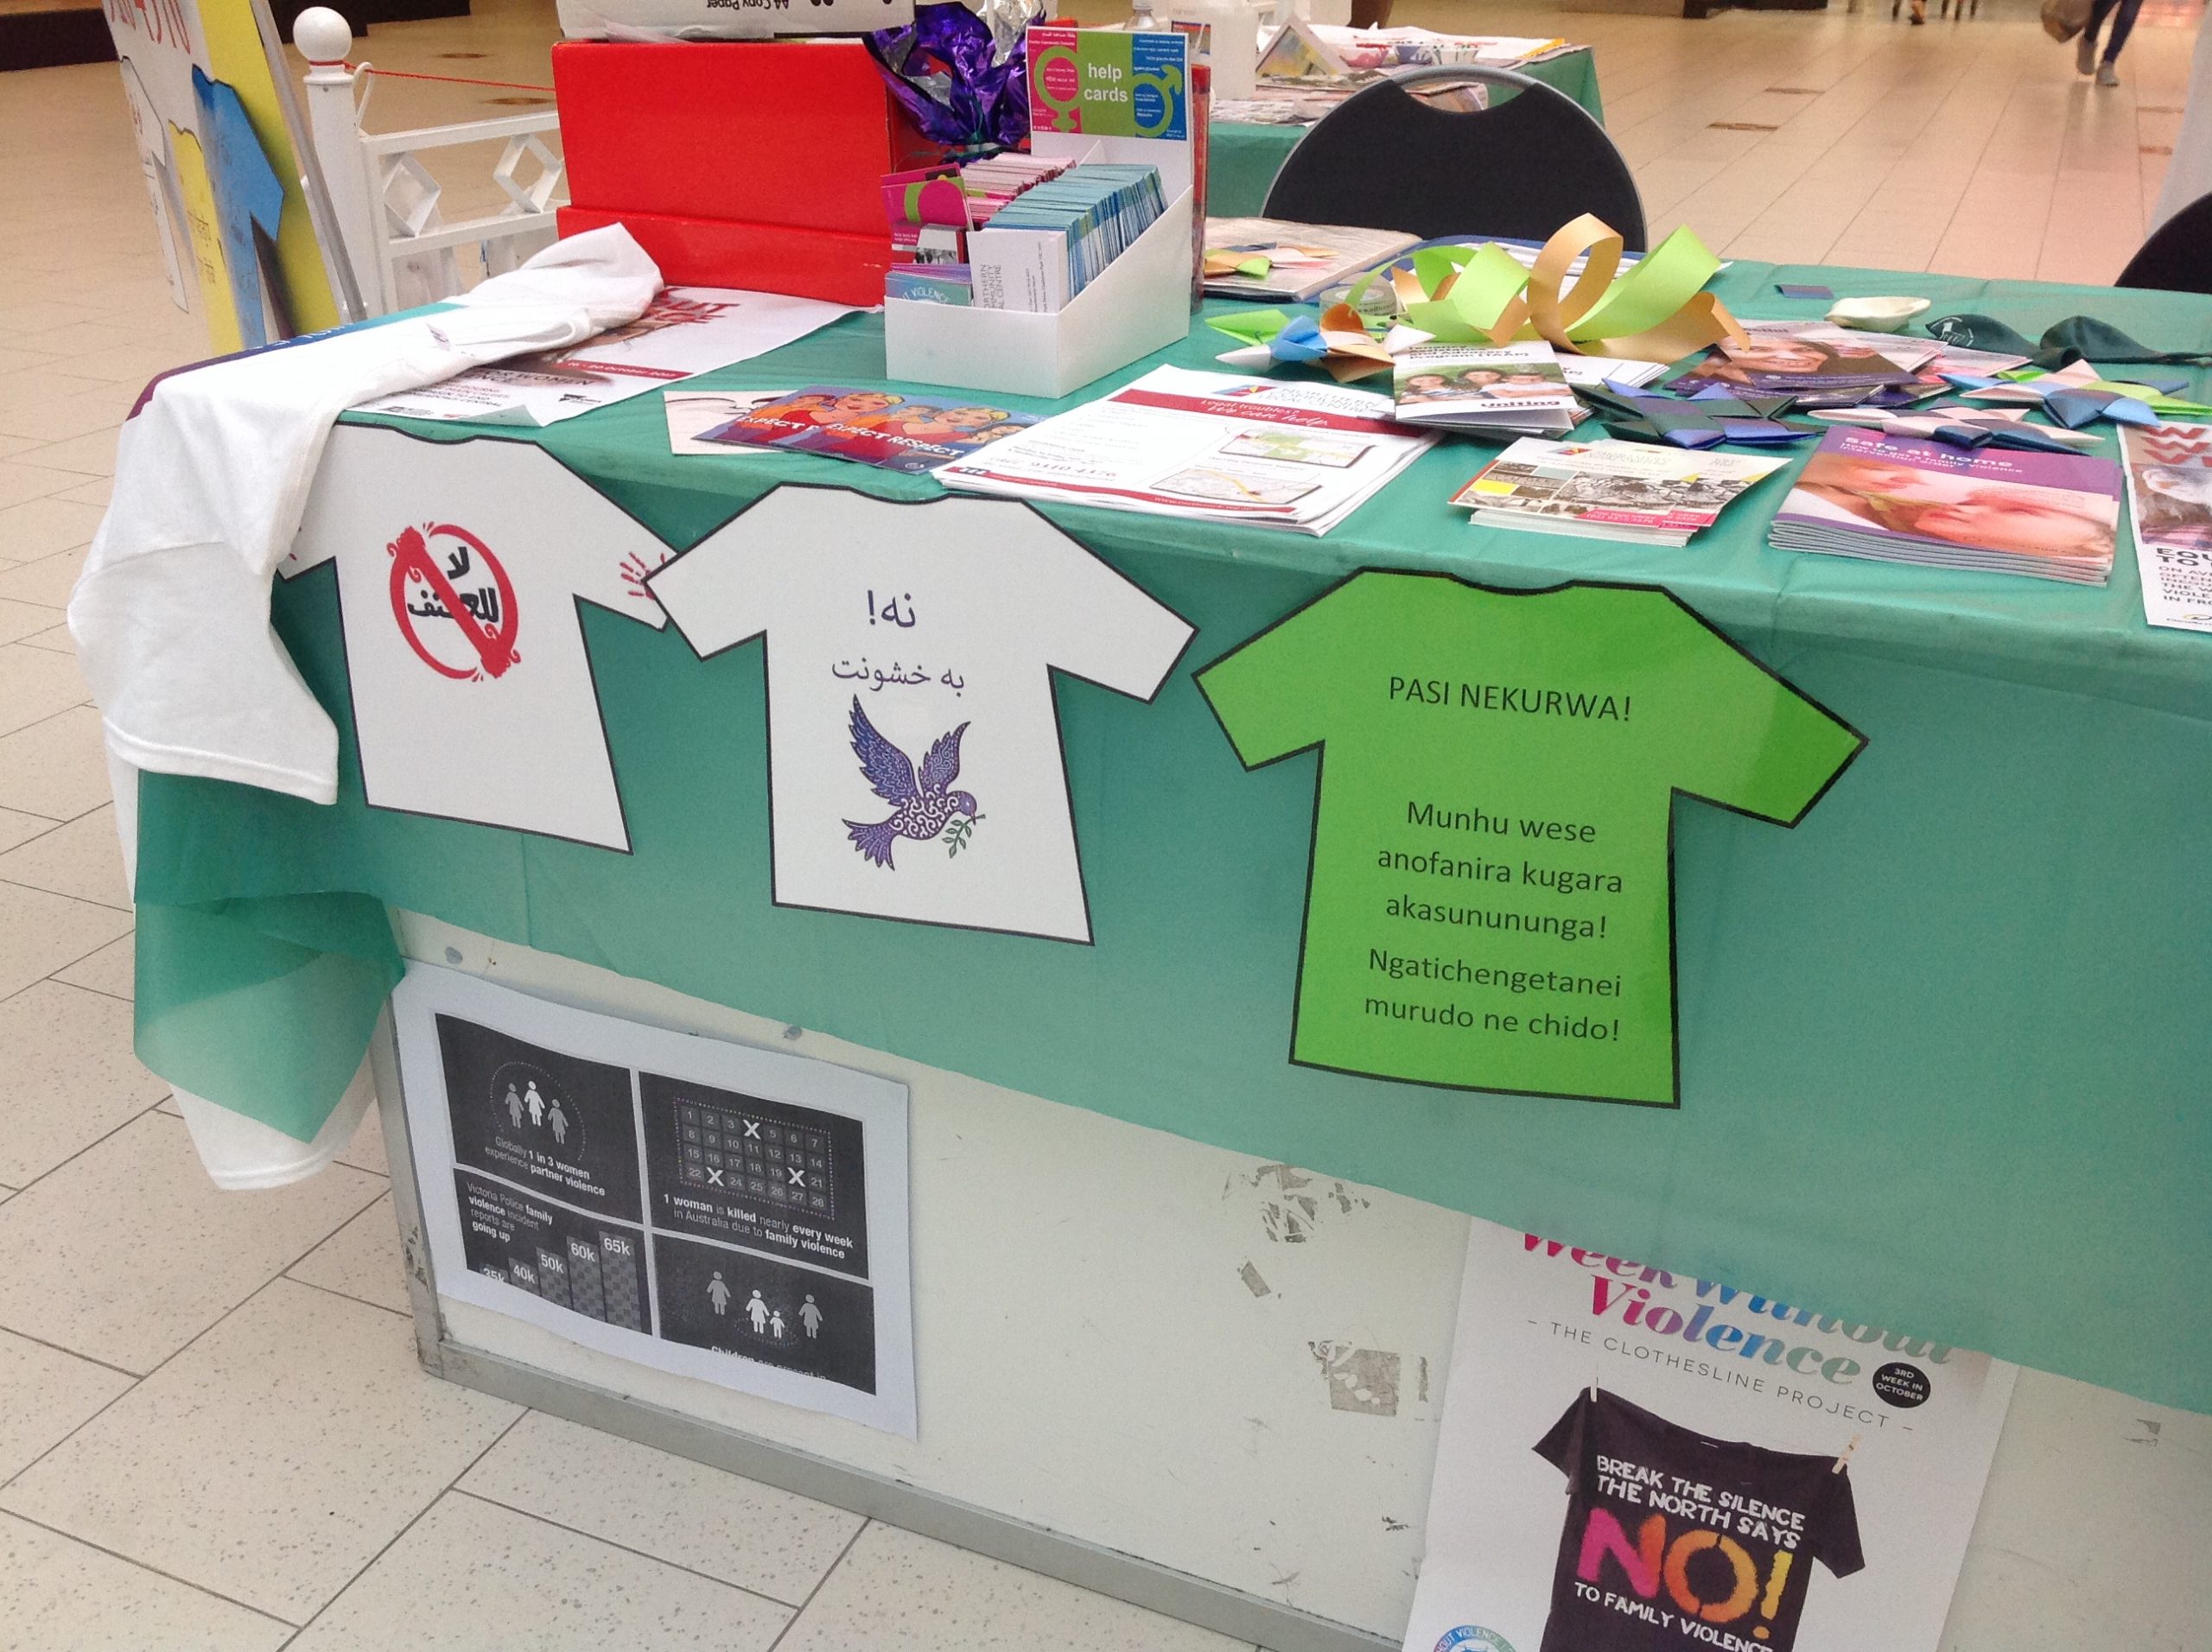 Week Without Violence Display, Broadmeadows Plaza